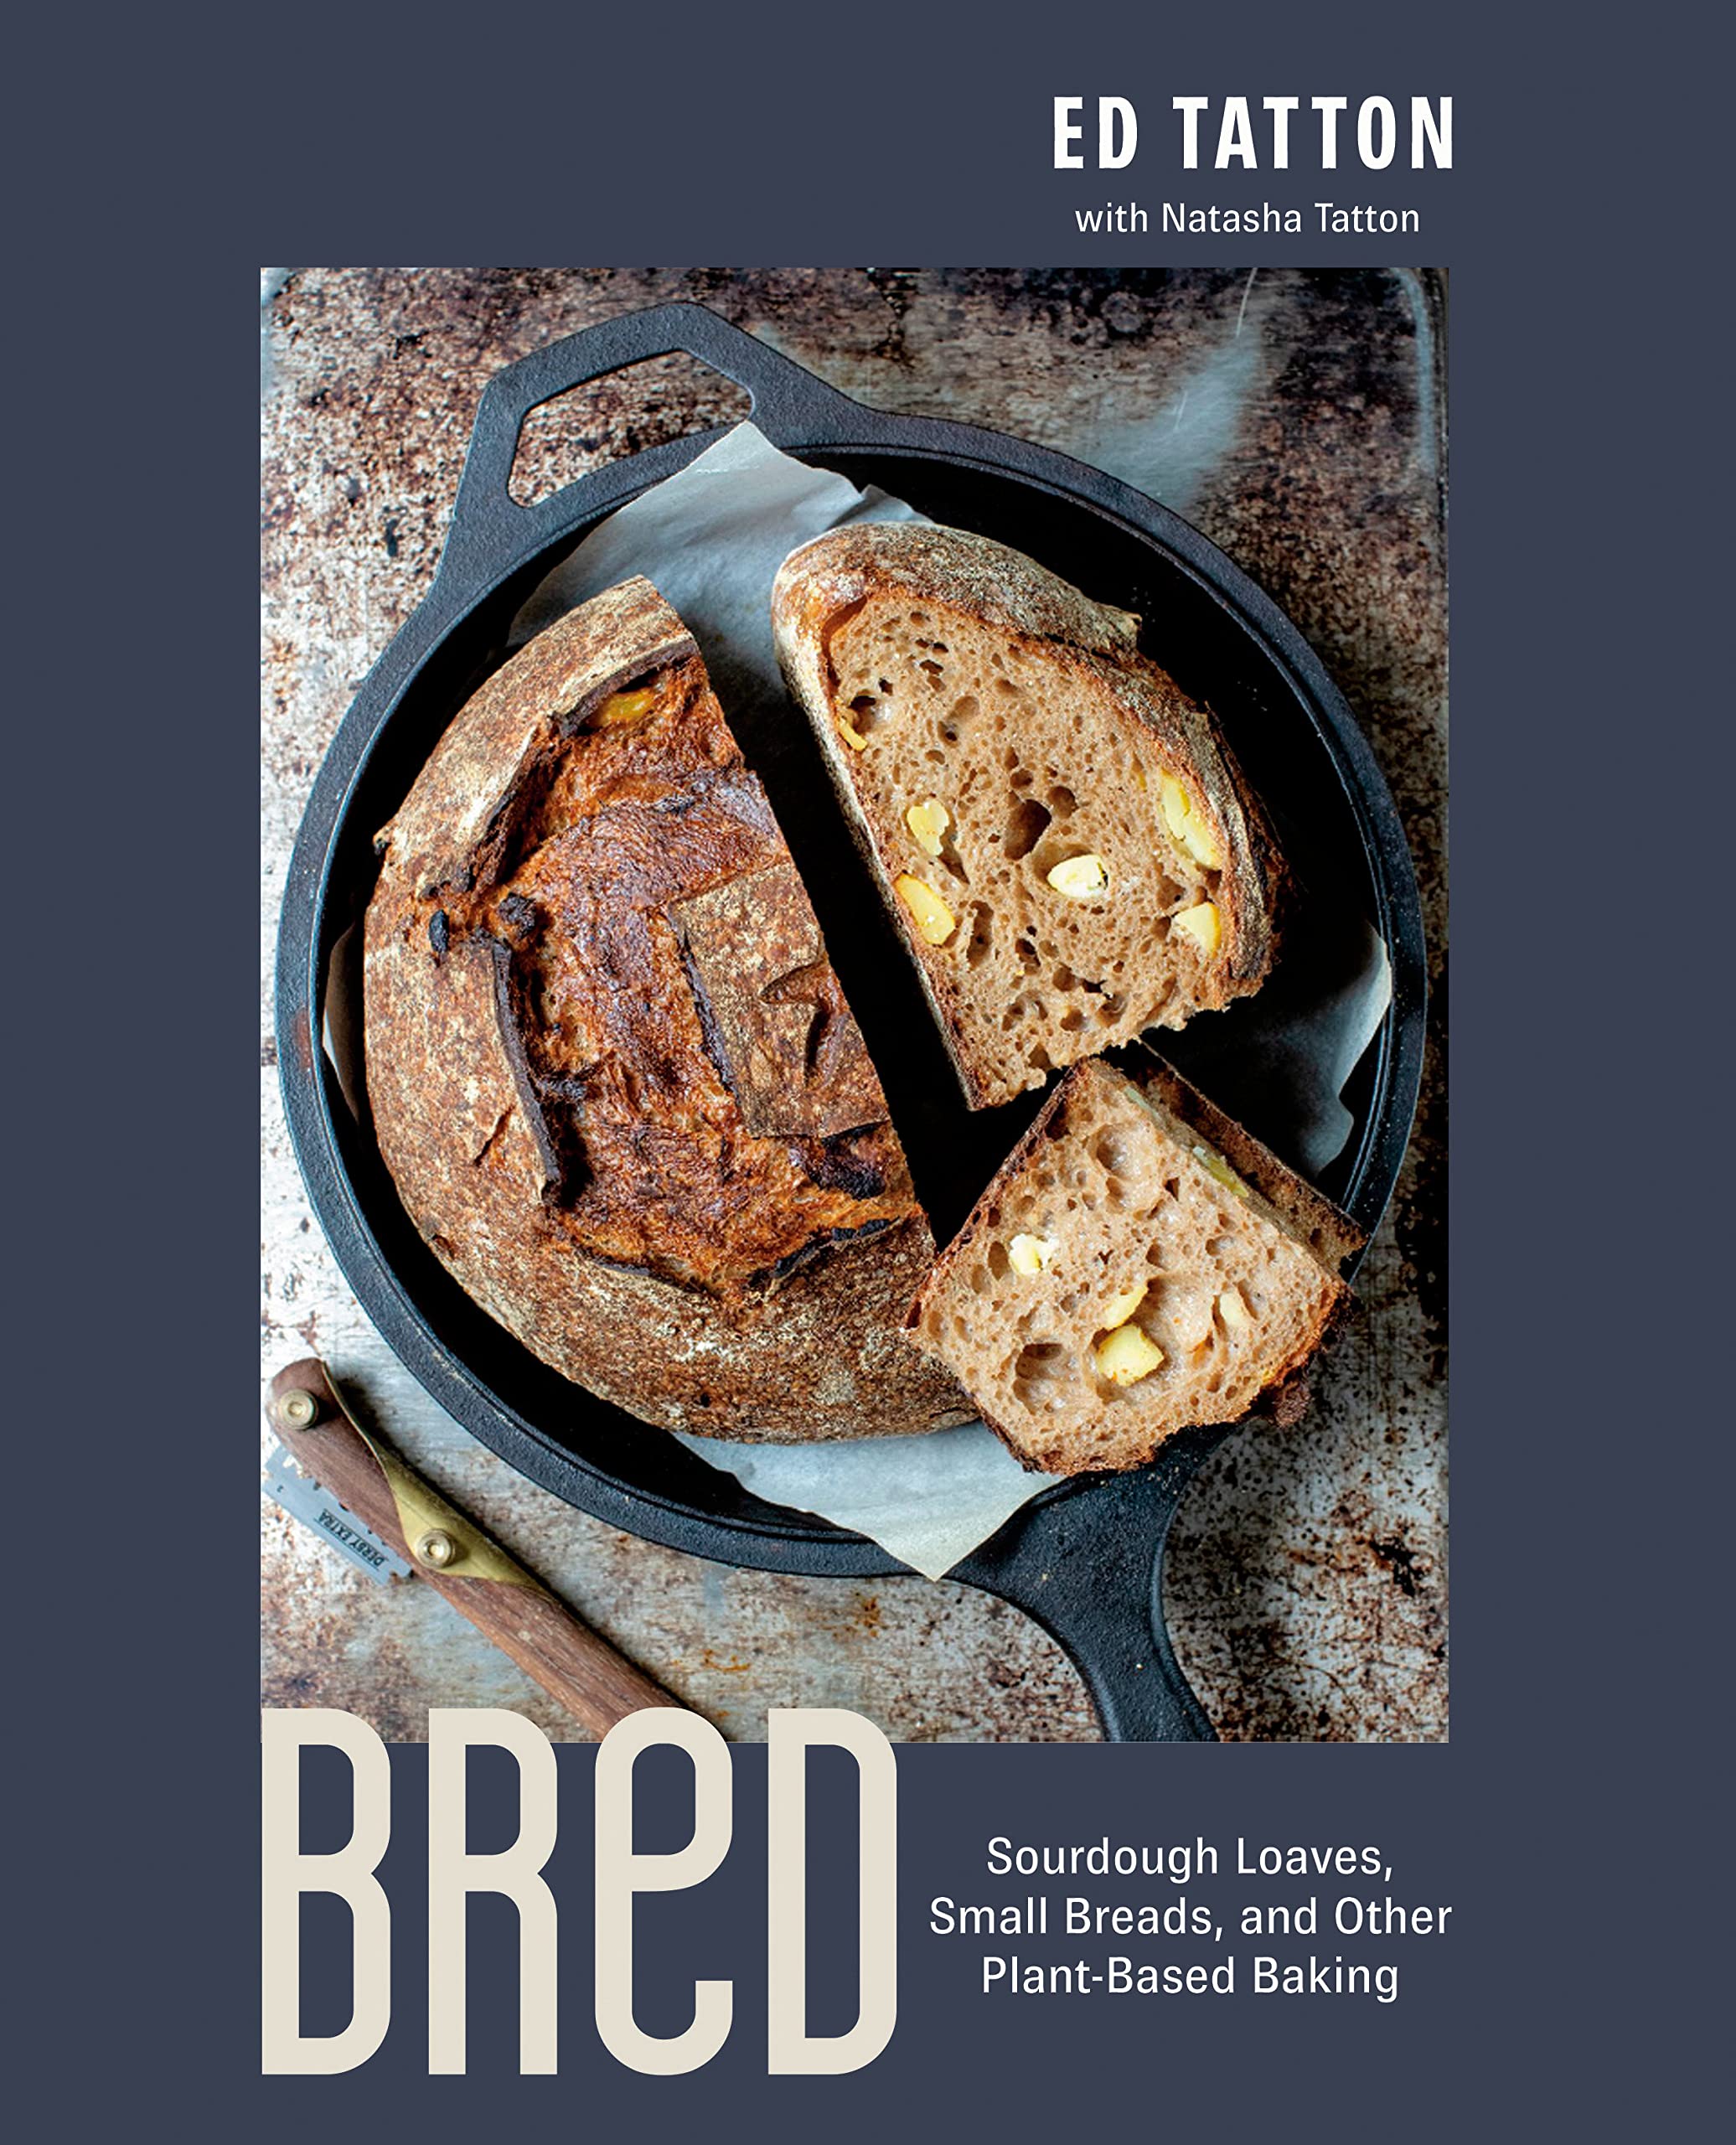 BReD: Sourdough Loaves, Small Breads, and Other Plant-Based Baking (Ed & Natasha Tatton)